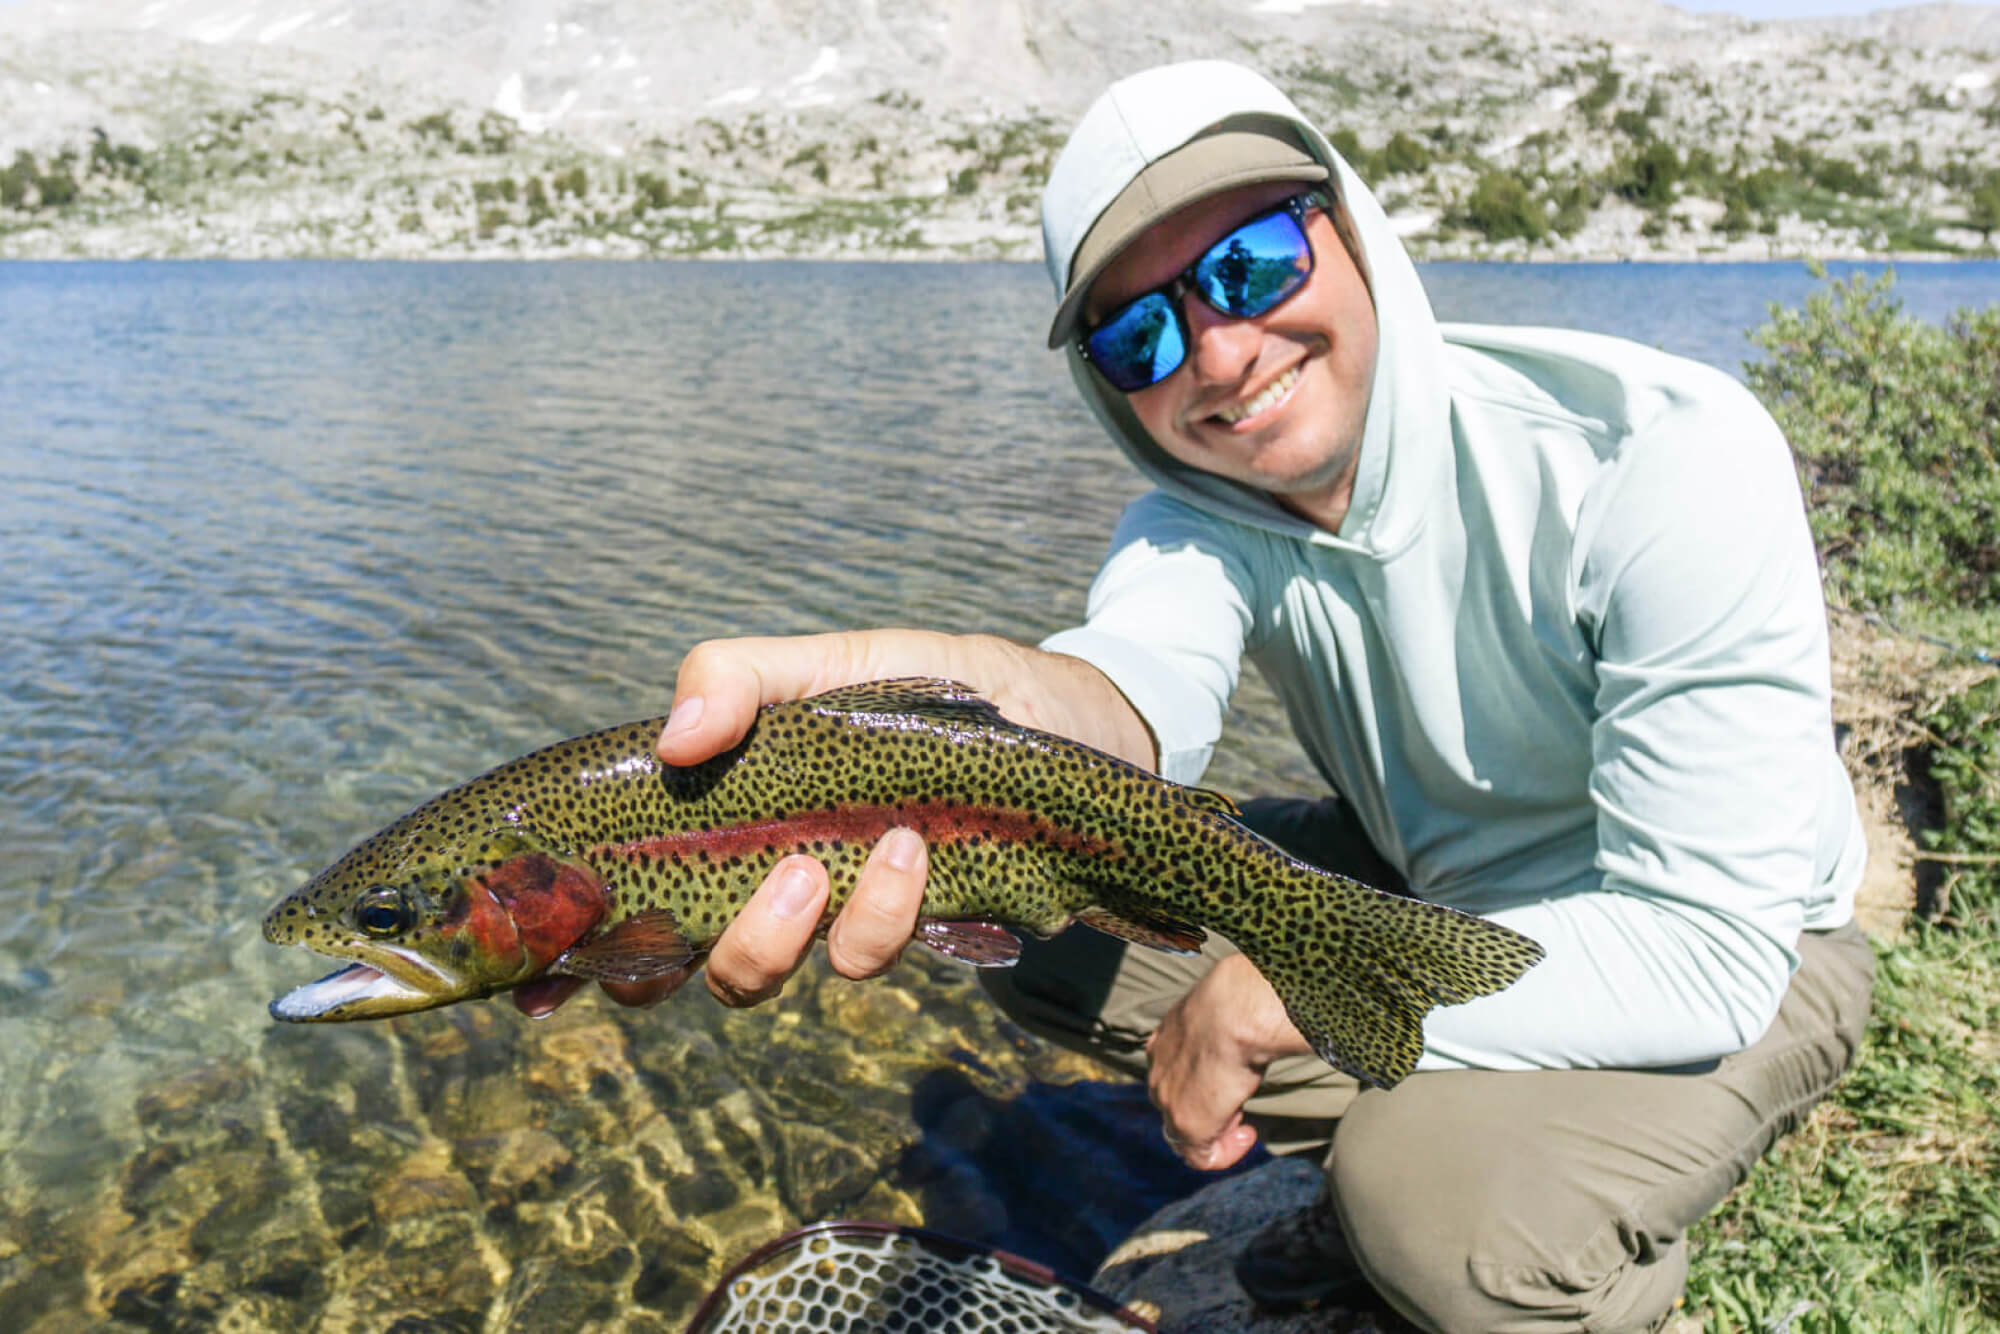 4 days spent fly fishing and backpacking California's High Sierra